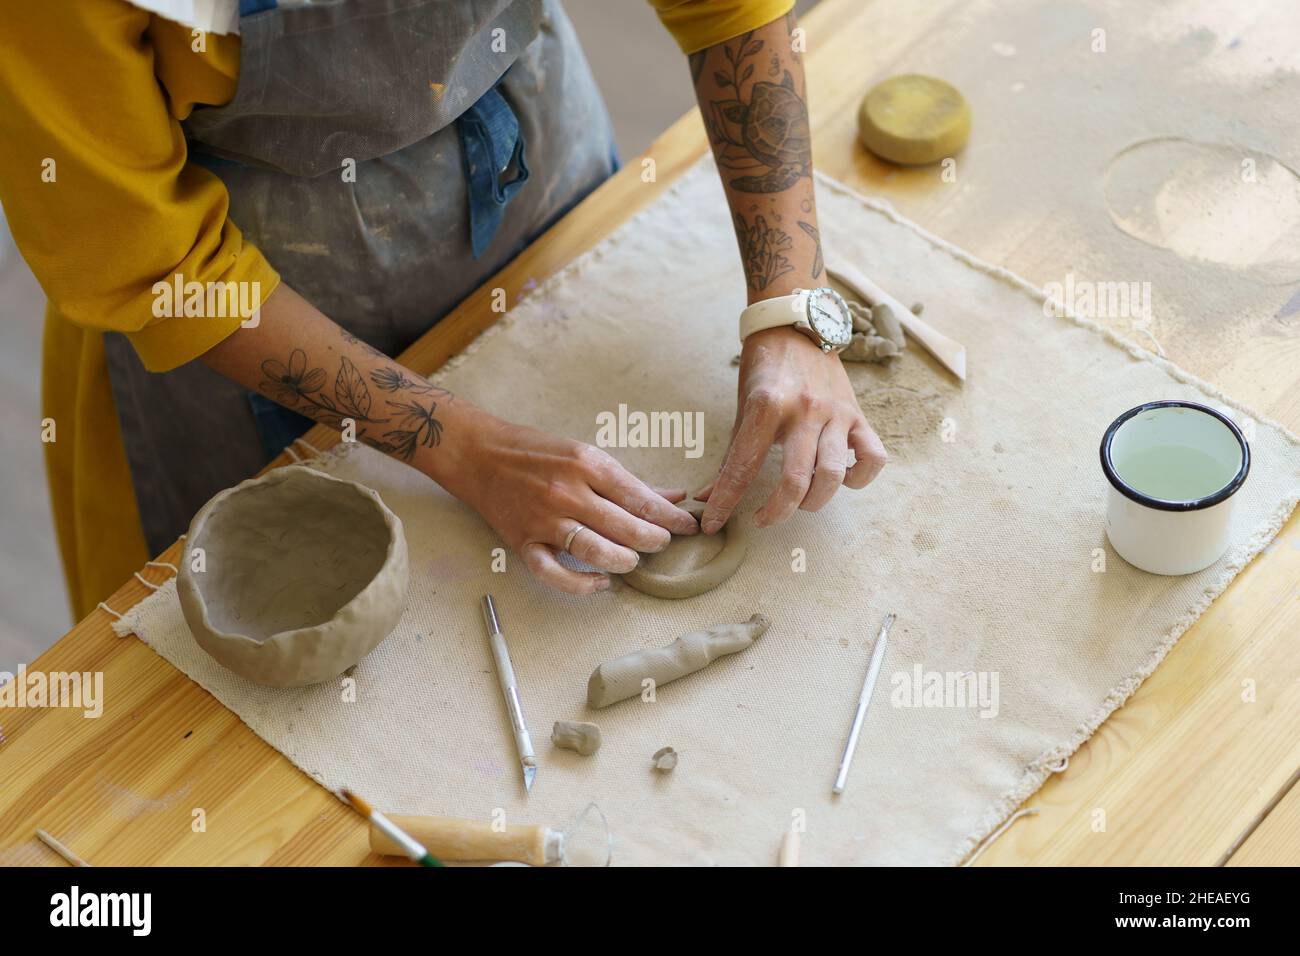 Cropped image of woman learning how to make hand-formed tableware during pottery masterclass Stock Photo